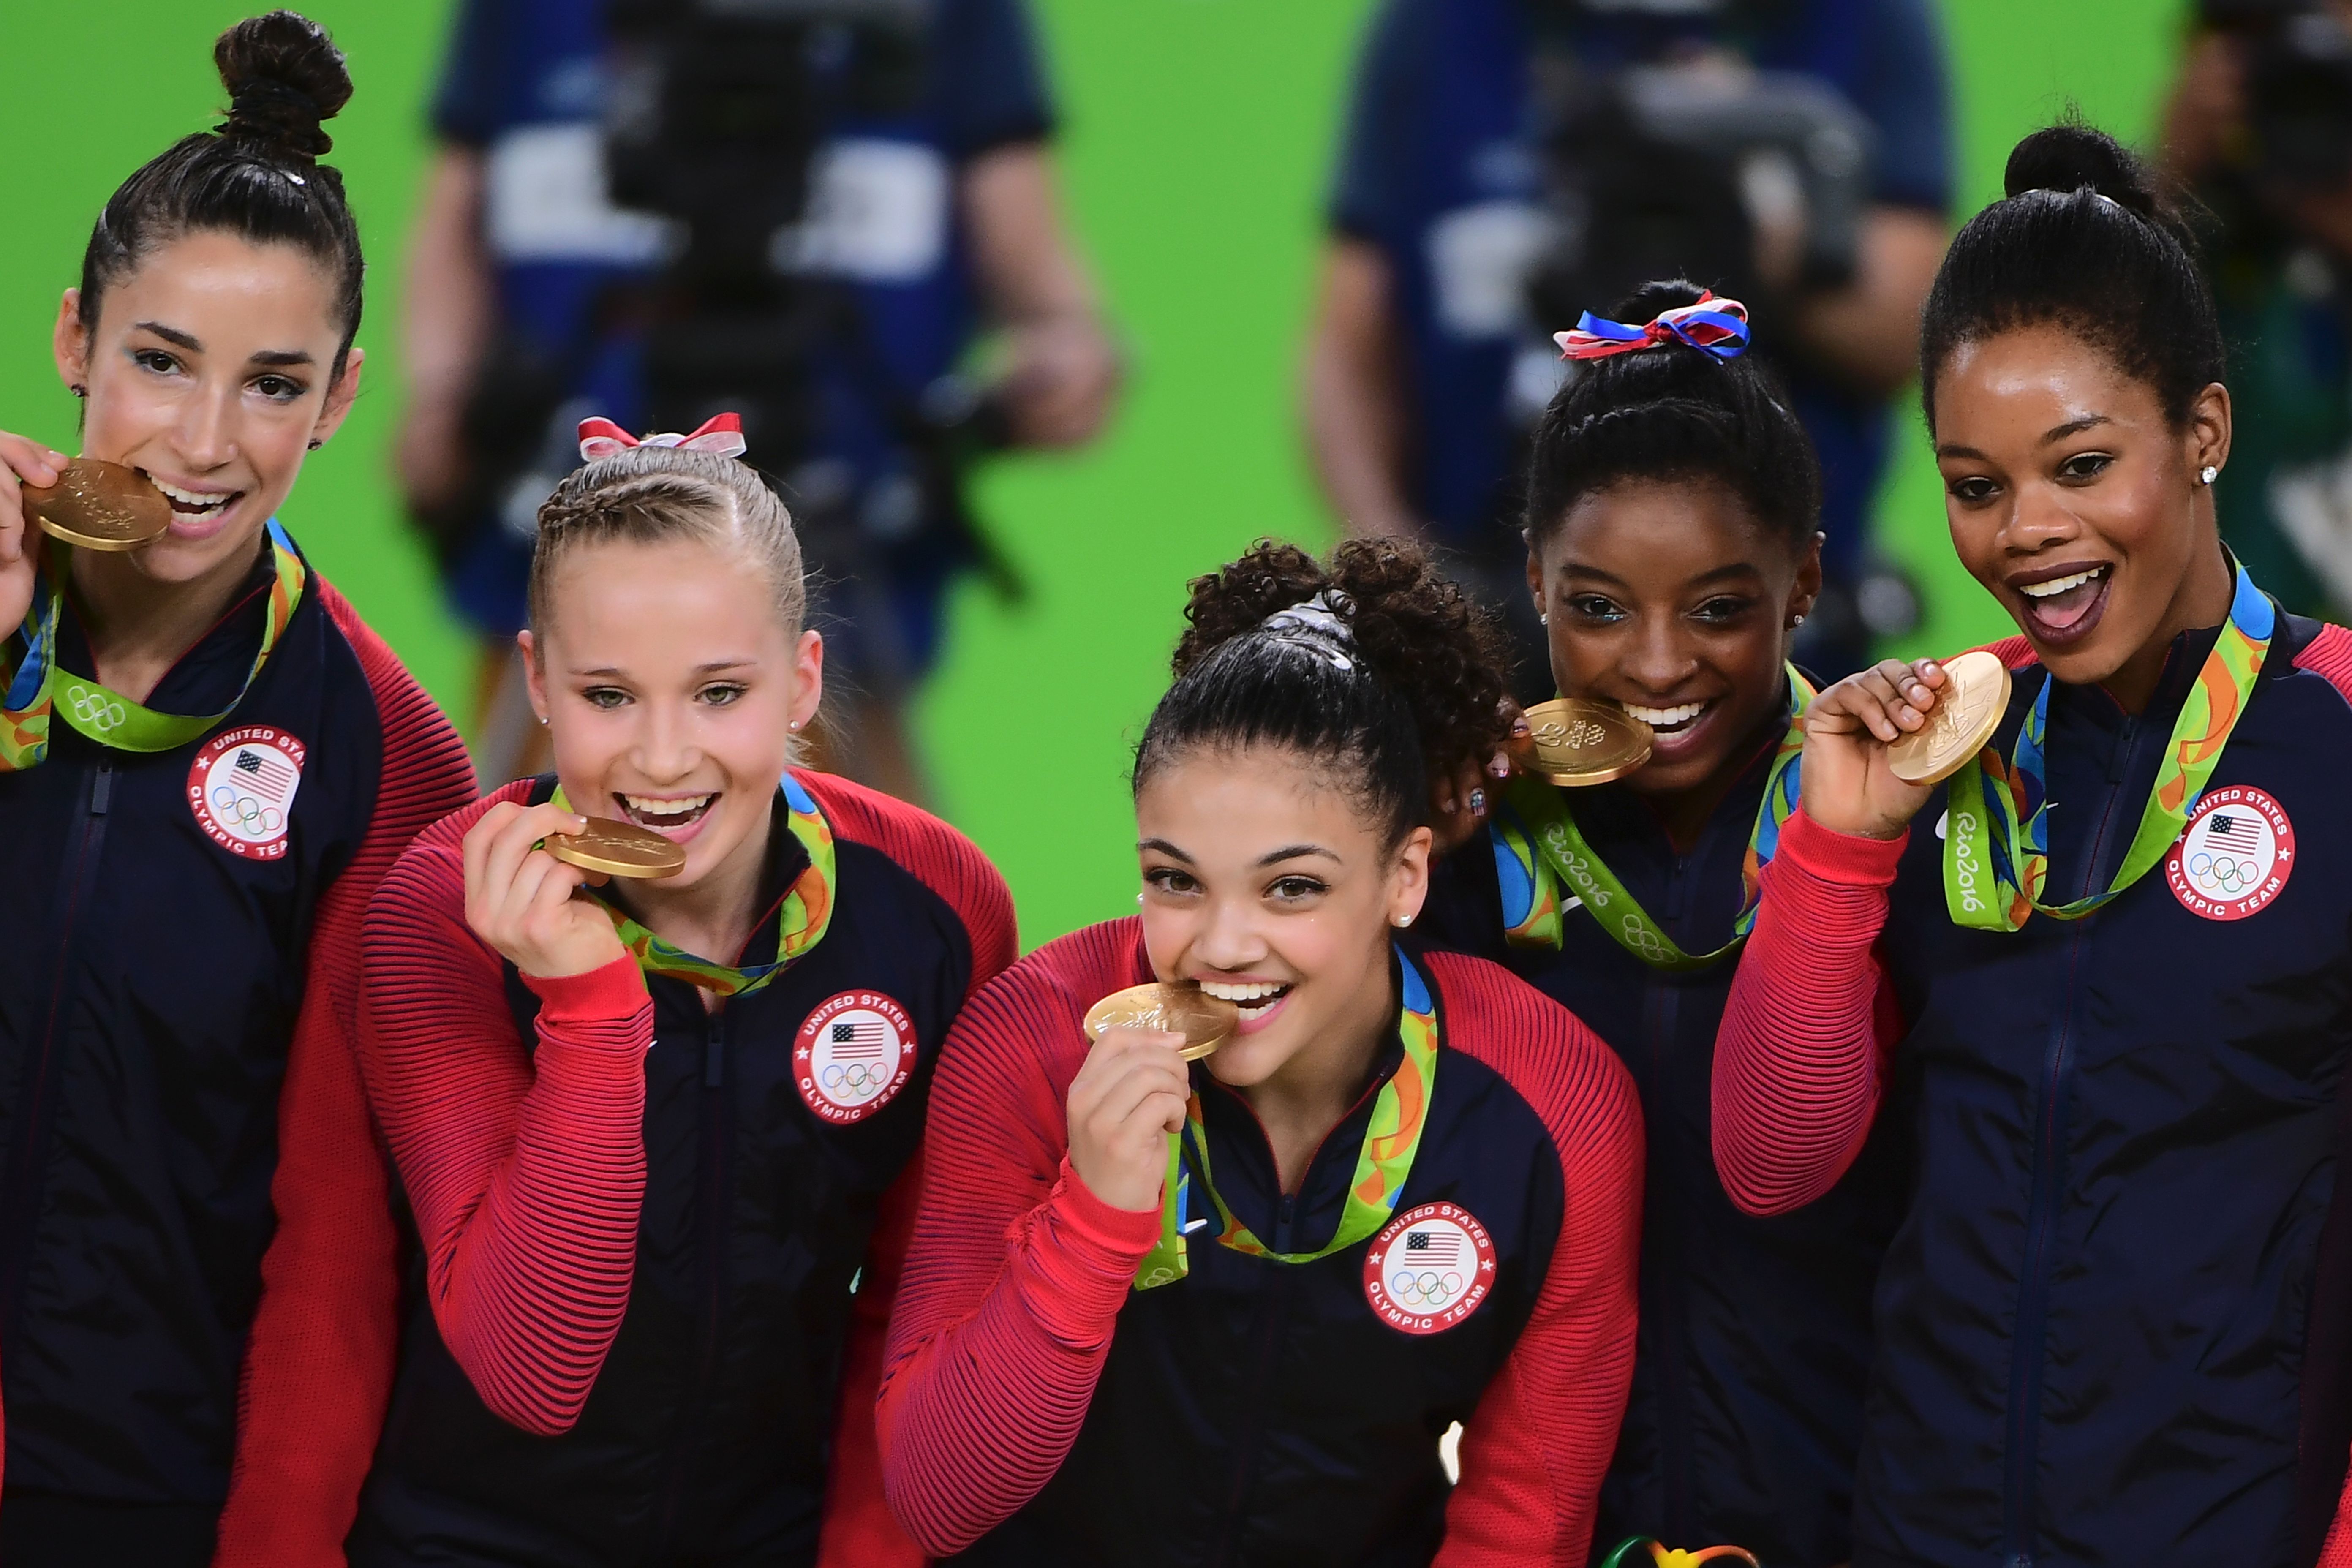 US gymnasts Alexandra Raisman, Madison Kocian, Lauren Hernandez, Simone Biles and Gabrielle Douglas celebrate with their gold medals on the podium during the women's team final Artistic Gymnastics at the Olympic Arena during the Rio 2016 Olympic Games in Rio de Janeiro on August 9, 2016. Photo Credit: EMMANUEL DUNAND/AFP/Getty Images.